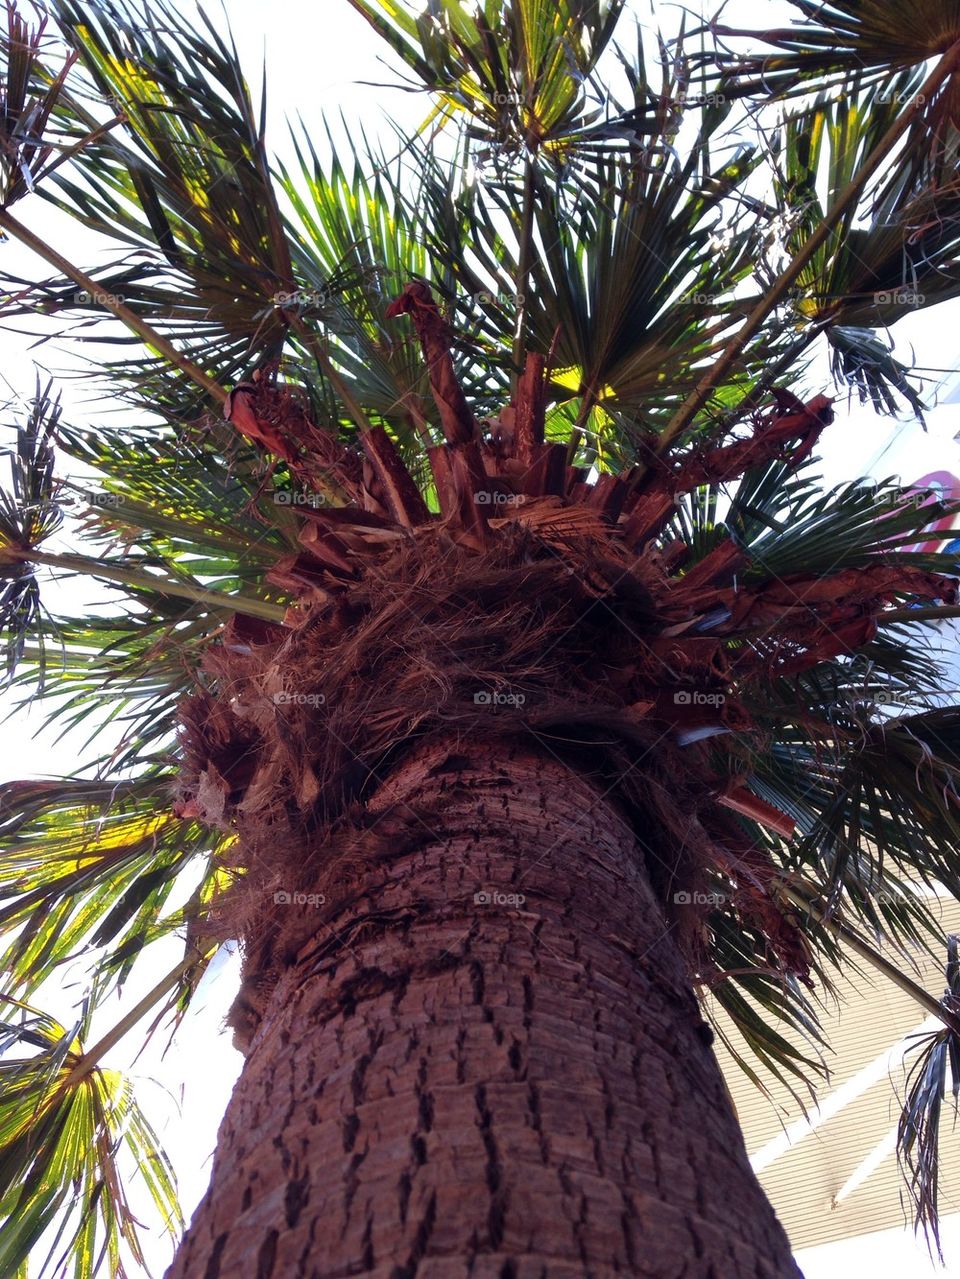 Looking up... Palm tree